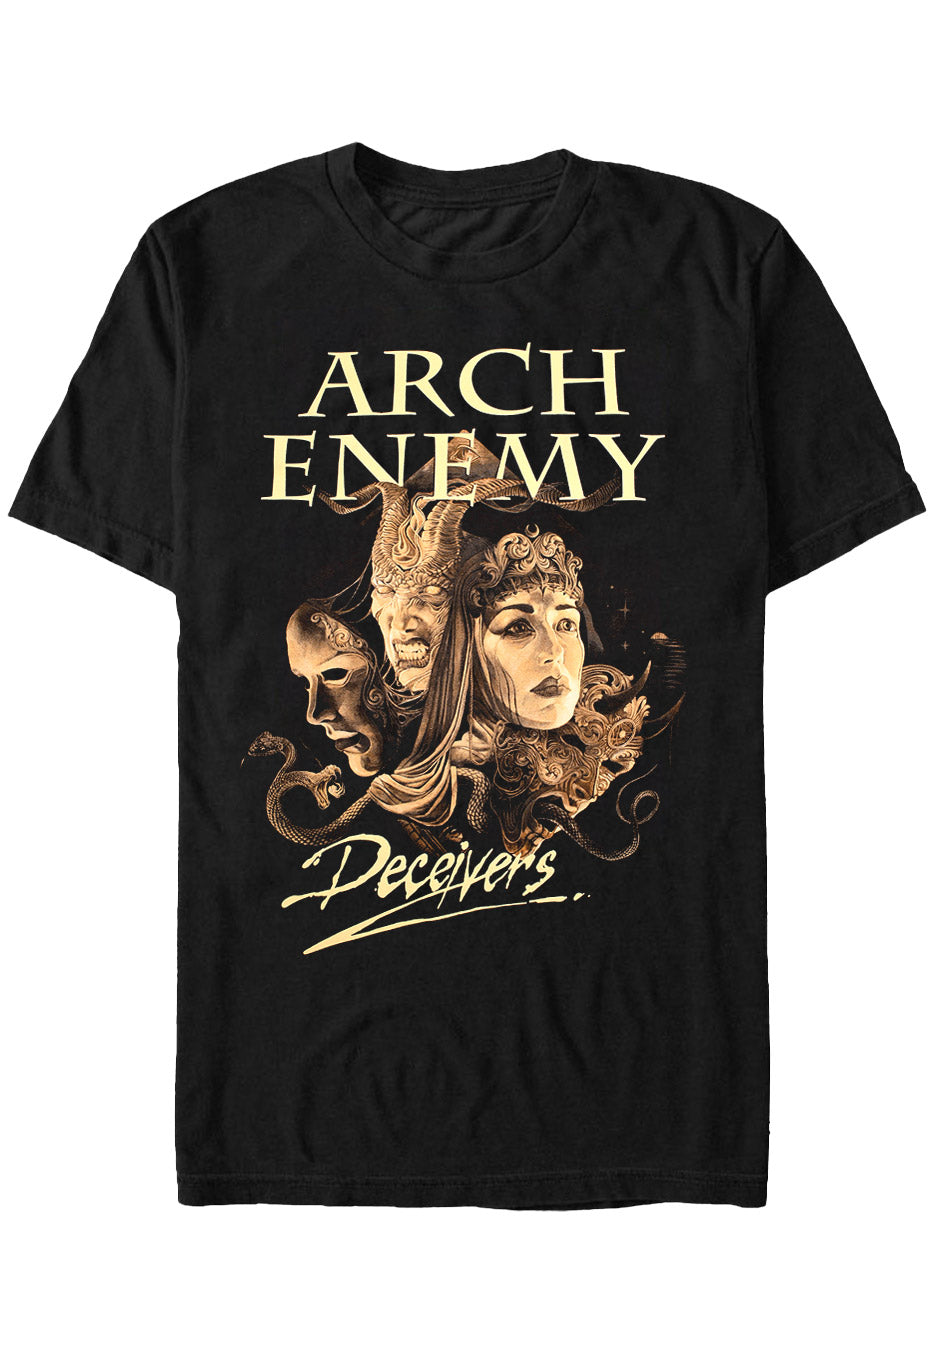 Arch Enemy - Deceivers Cover Art - T-Shirt